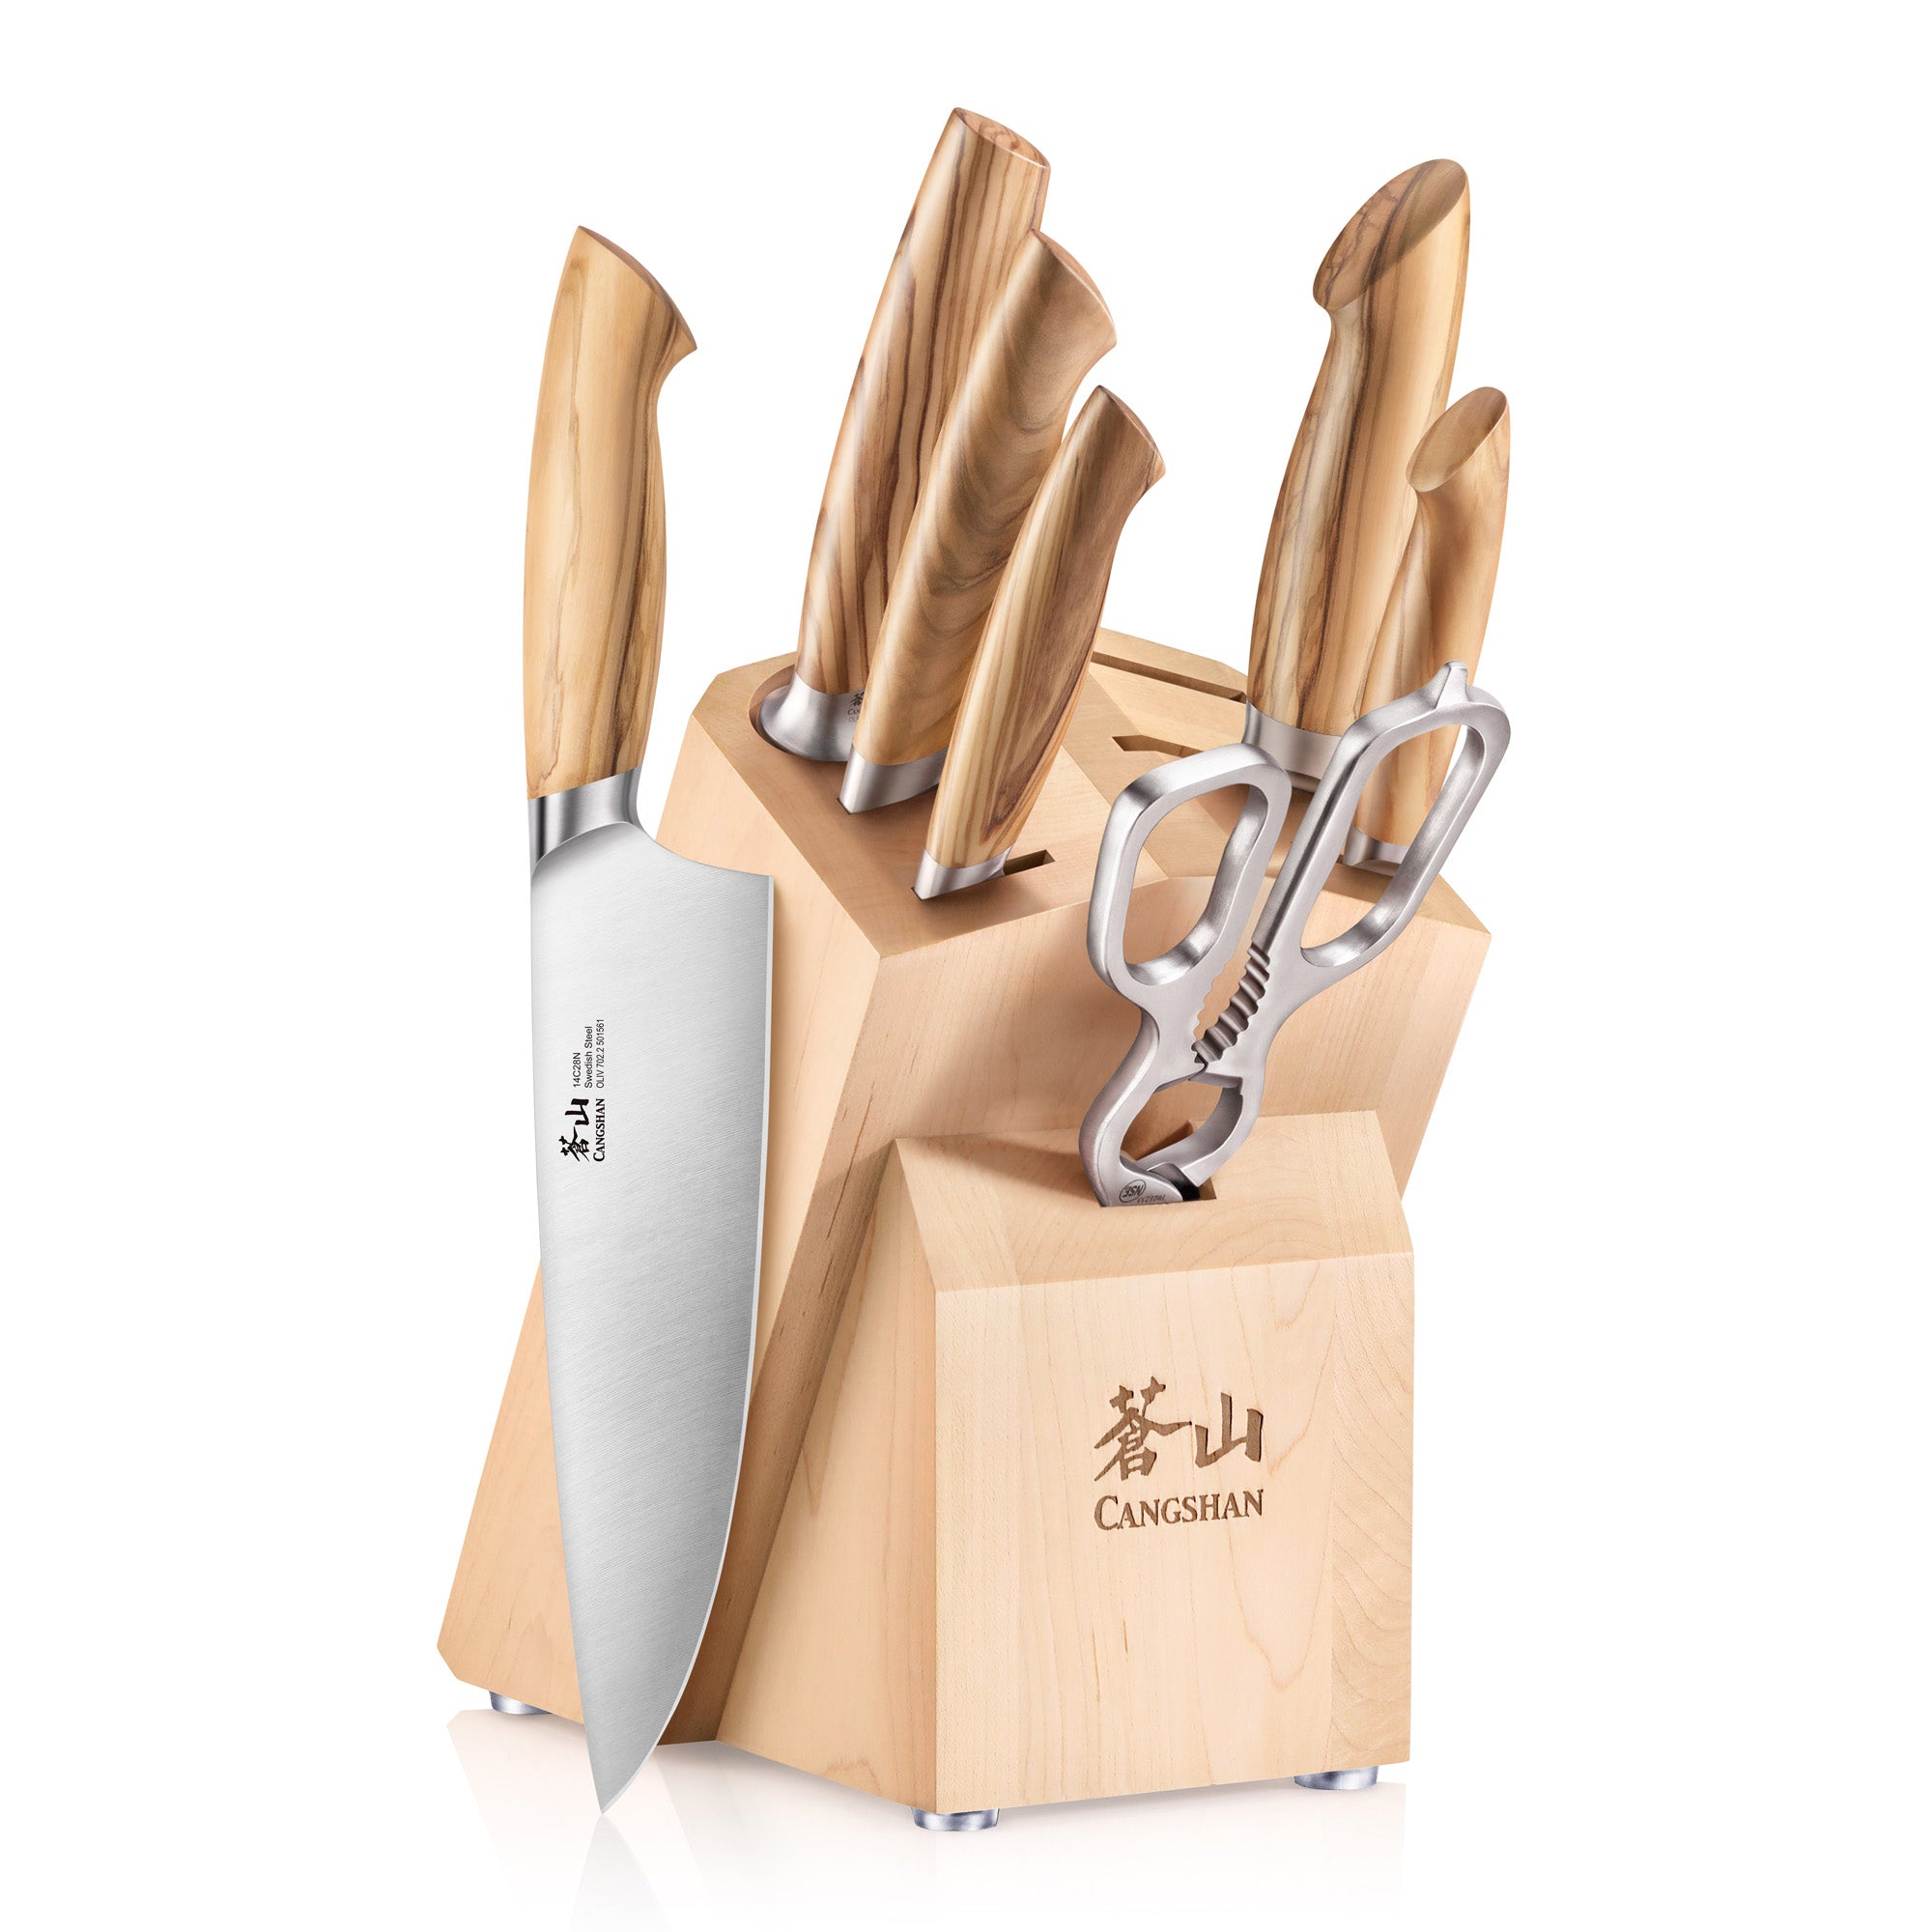 Aoibox 19-Piece Stainless Steel Kitchen Knife Set with Wooden Knife Block, Silver